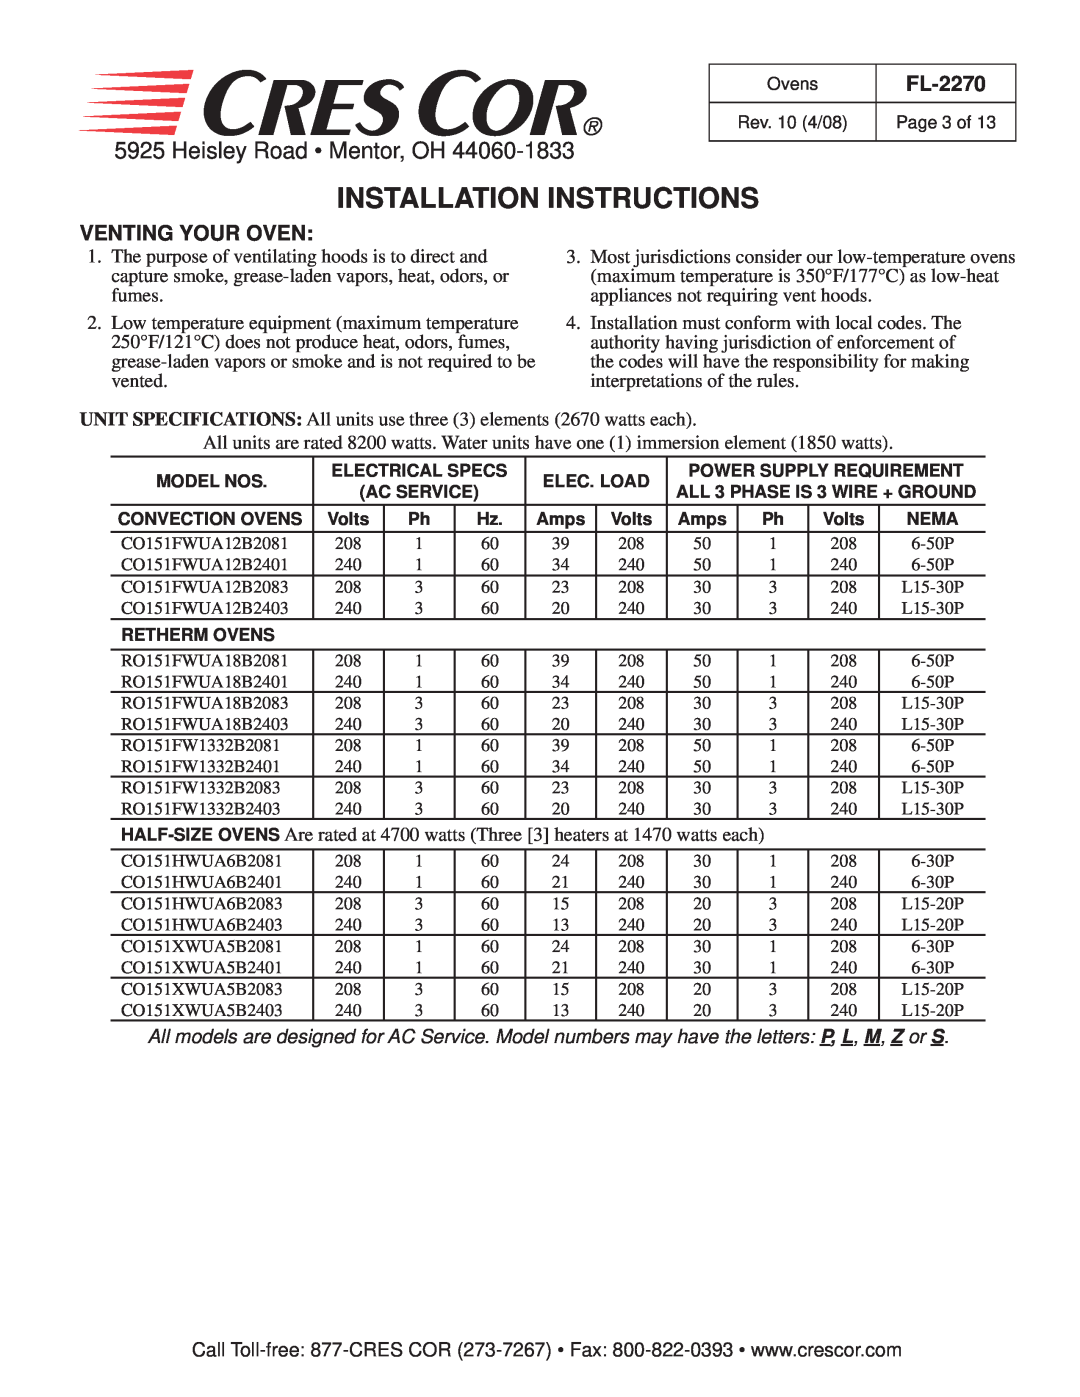 Cres Cor CO151FW1818B, CO151XW185B manual Installation Instructions, Heisley Road Mentor, OH, FL-2270, Venting Your Oven 